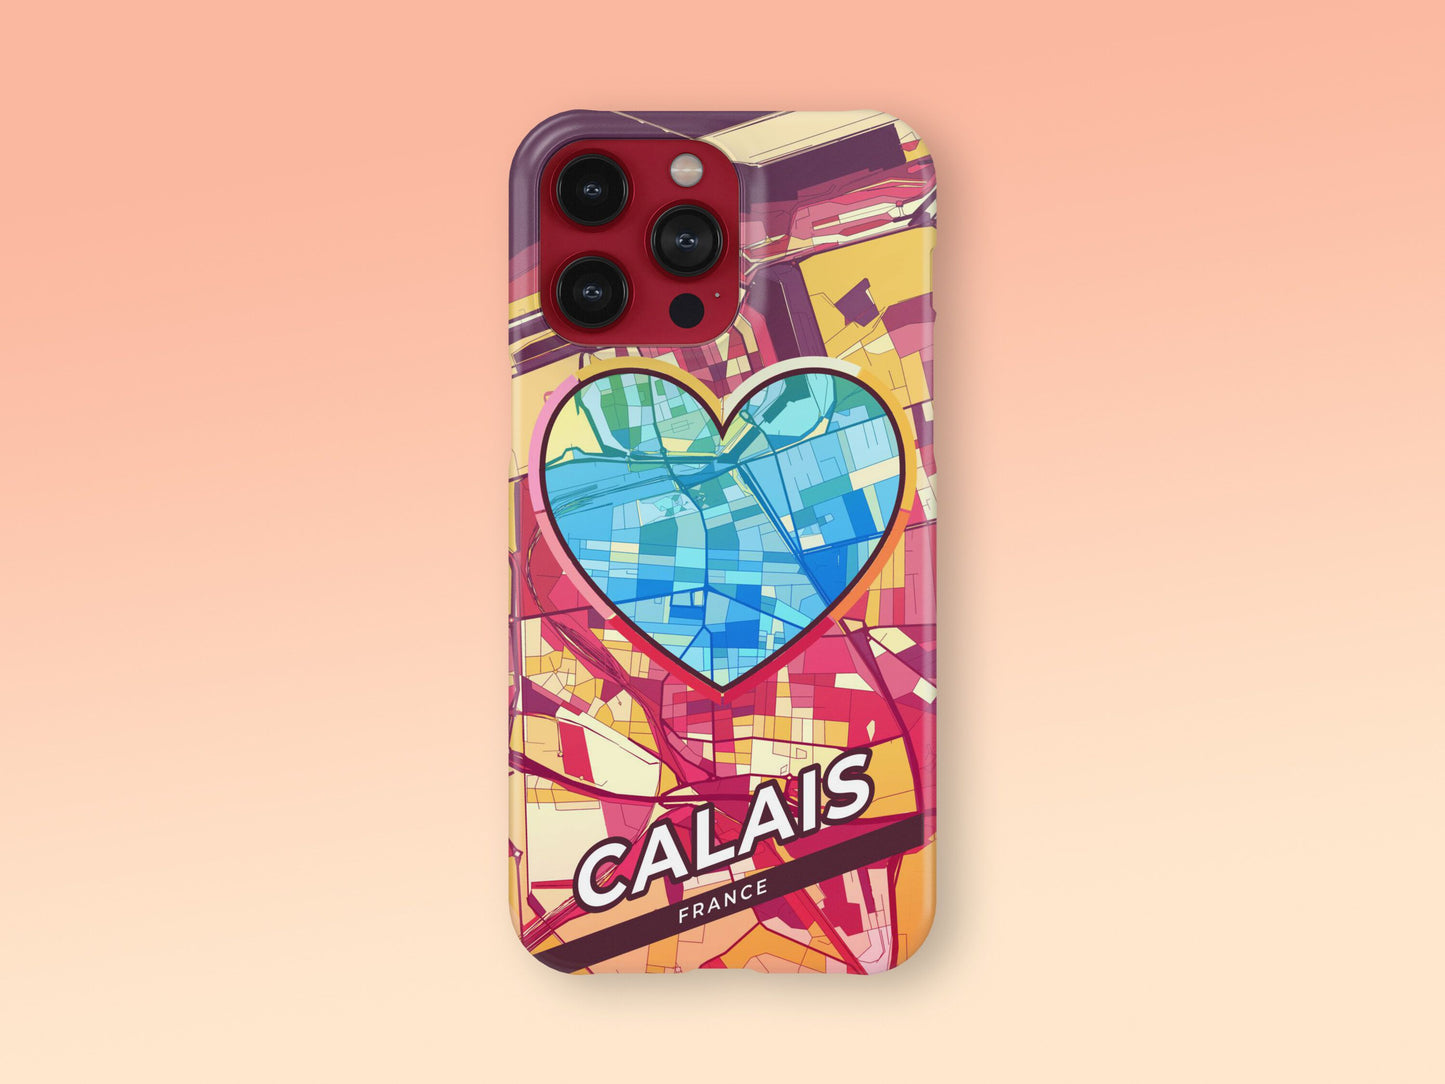 Calais France slim phone case with colorful icon. Birthday, wedding or housewarming gift. Couple match cases. 2